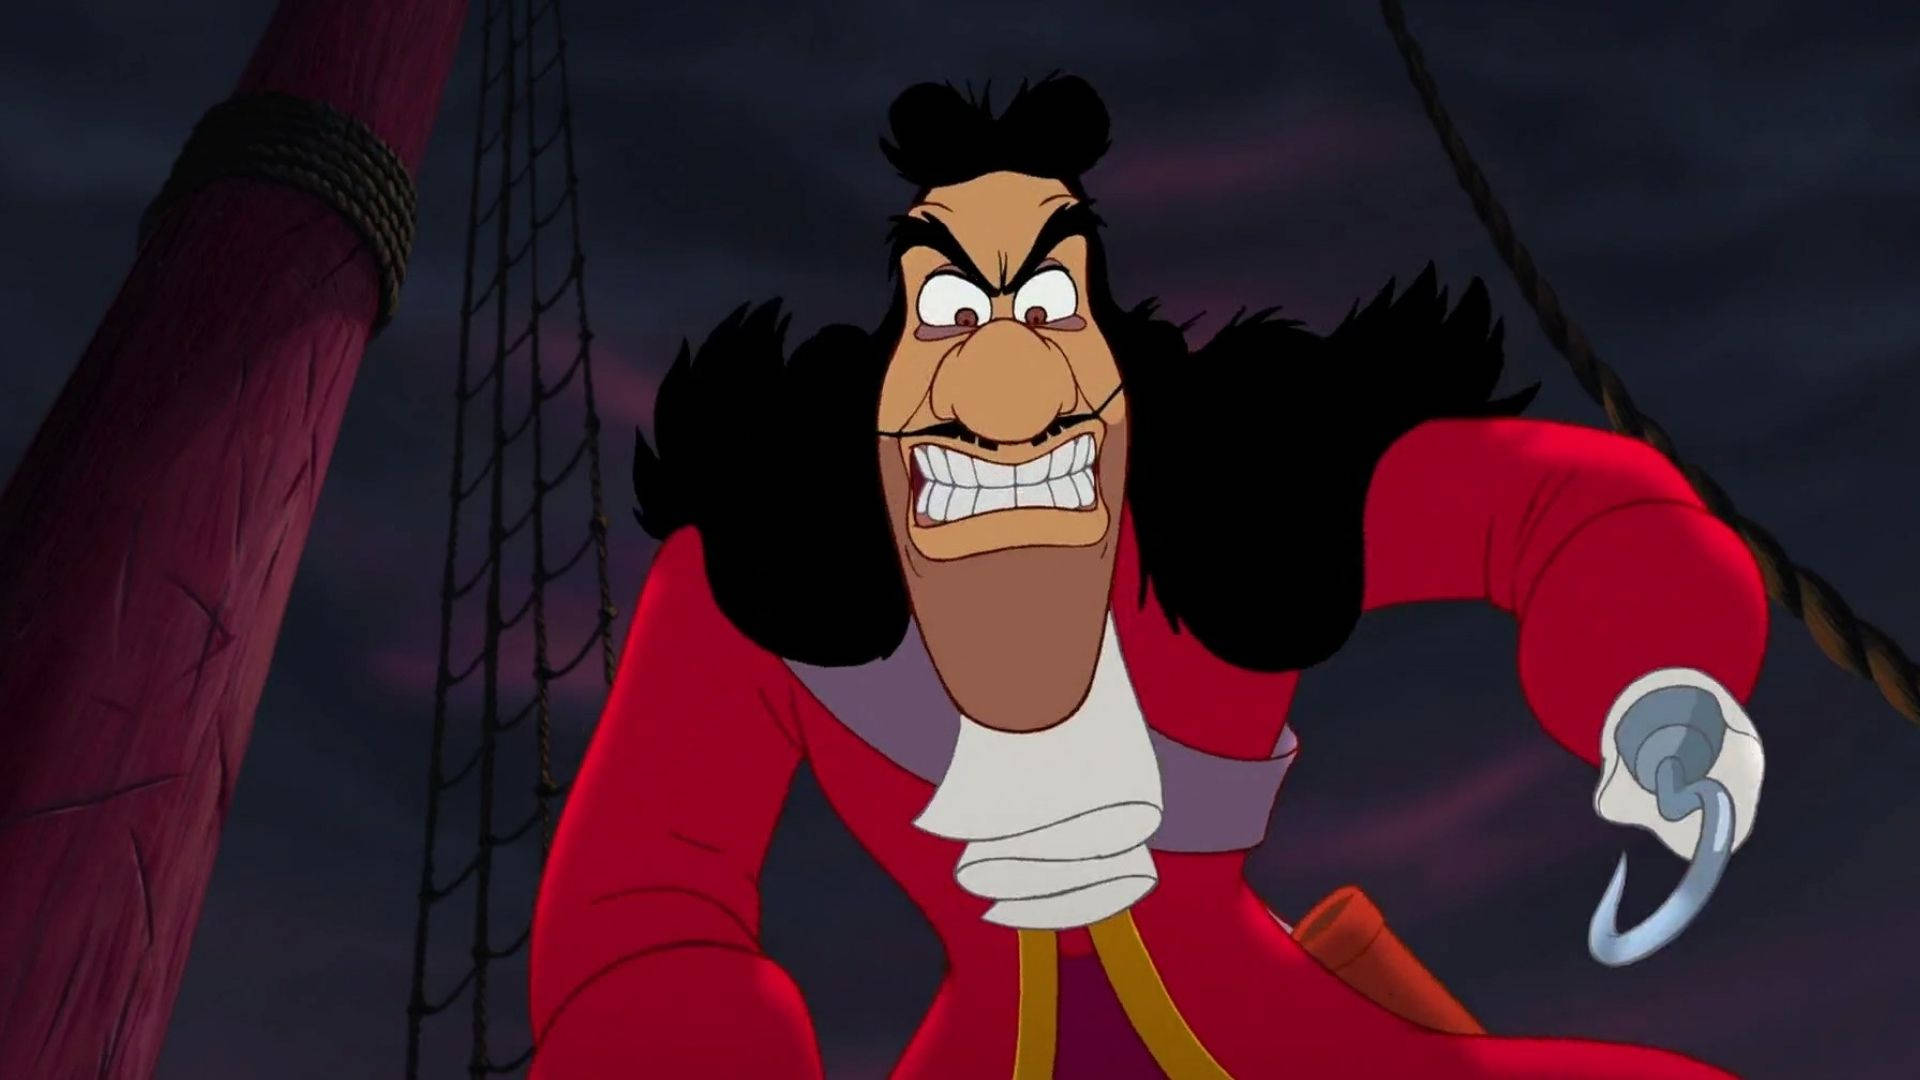 Download Angry Captain Hook Wallpaper